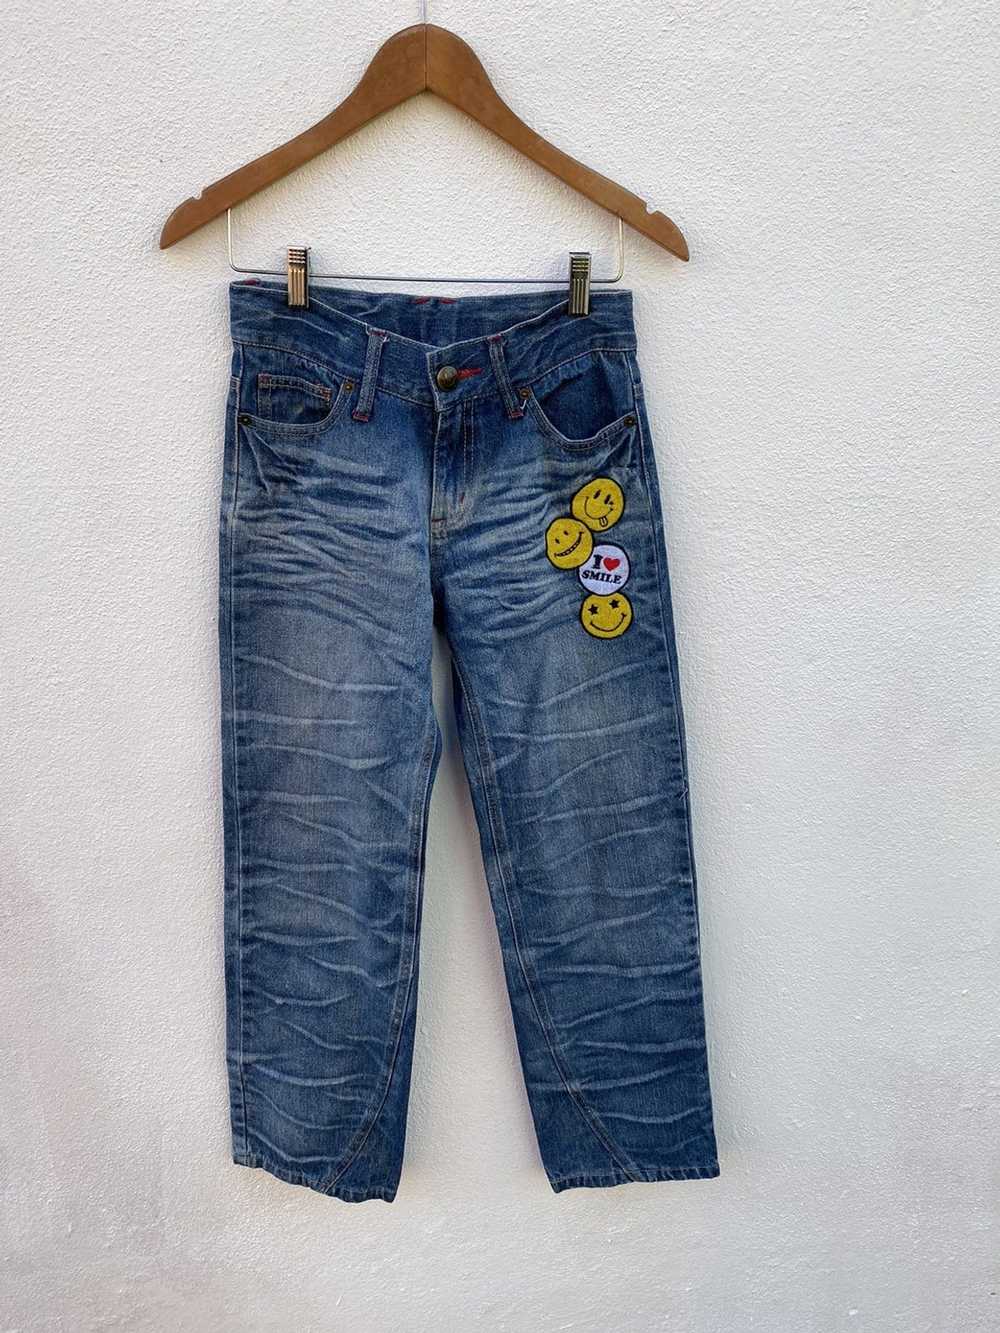 Japanese Brand Smiley Face Jeans - image 1